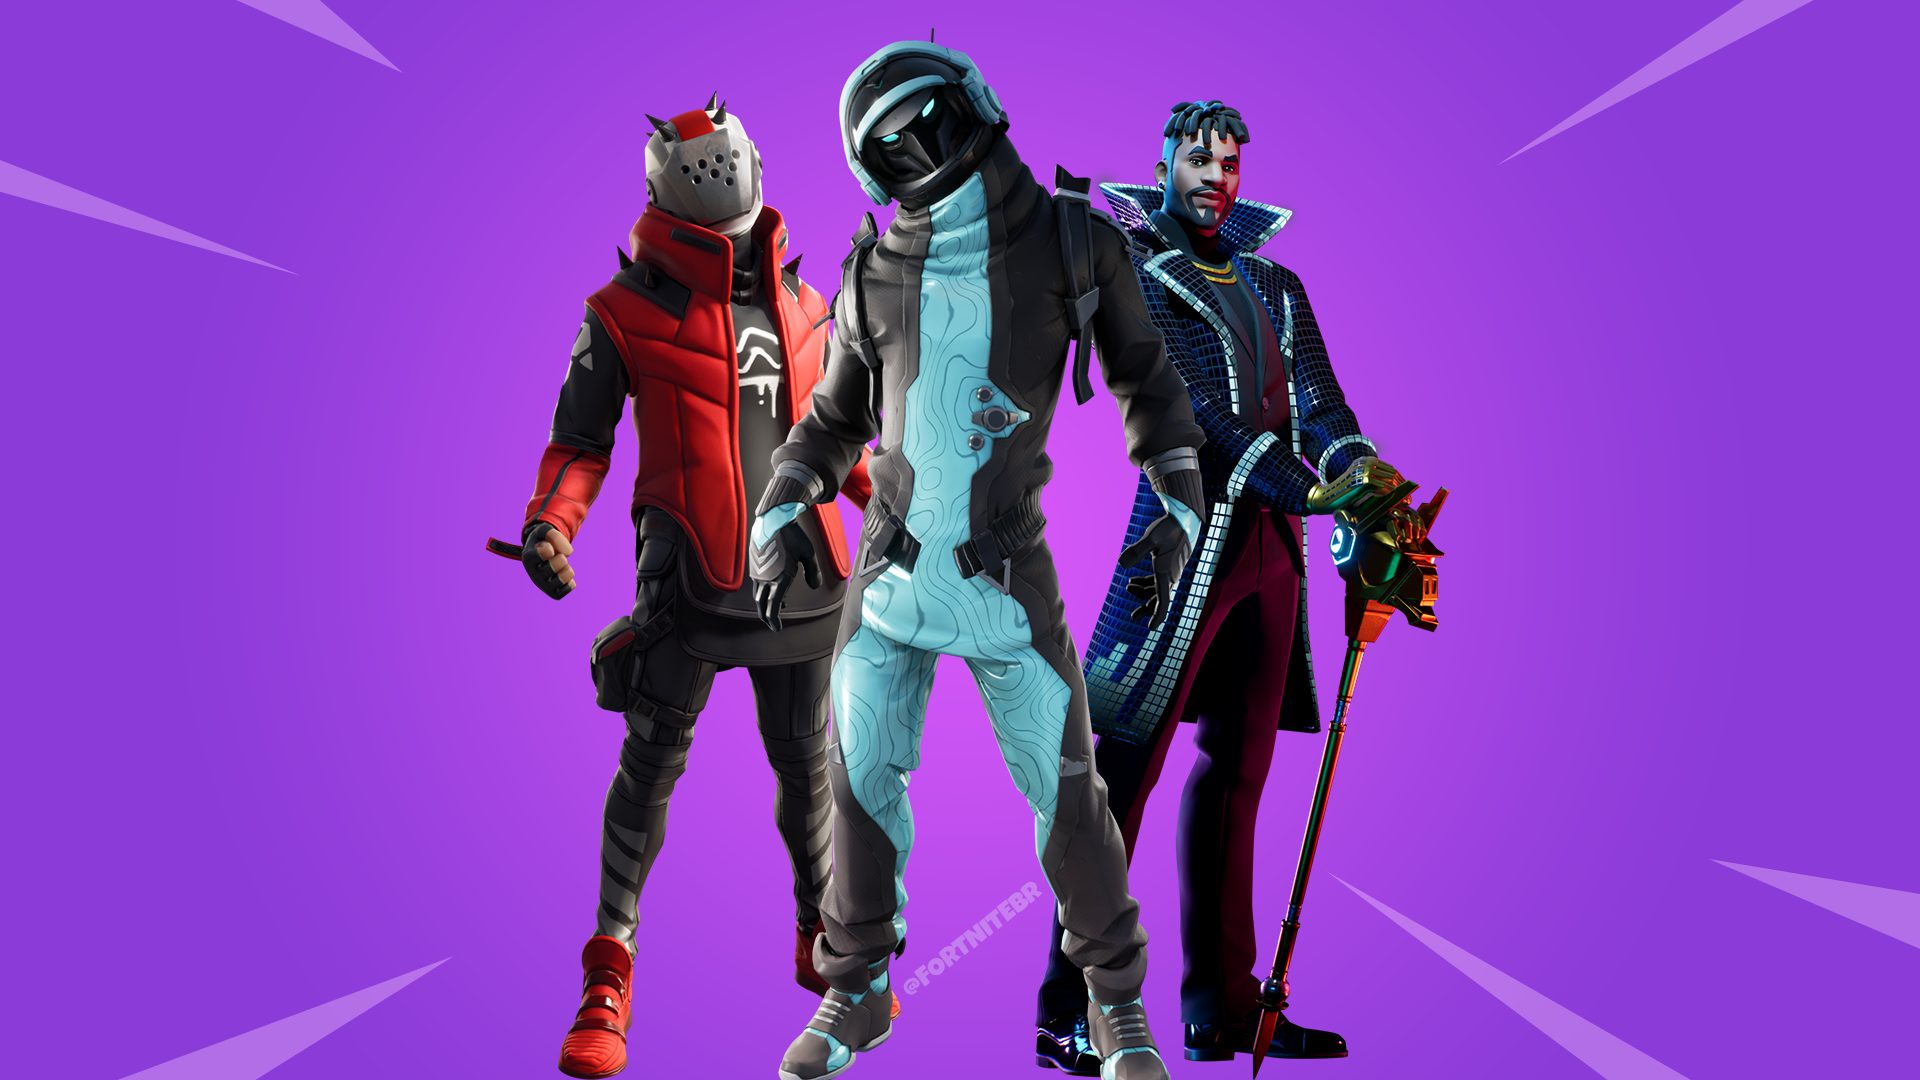 Fortnite Patch v10.00 - All Leaked Cosmetics (Skins, Emotes, Gliders, Wraps...